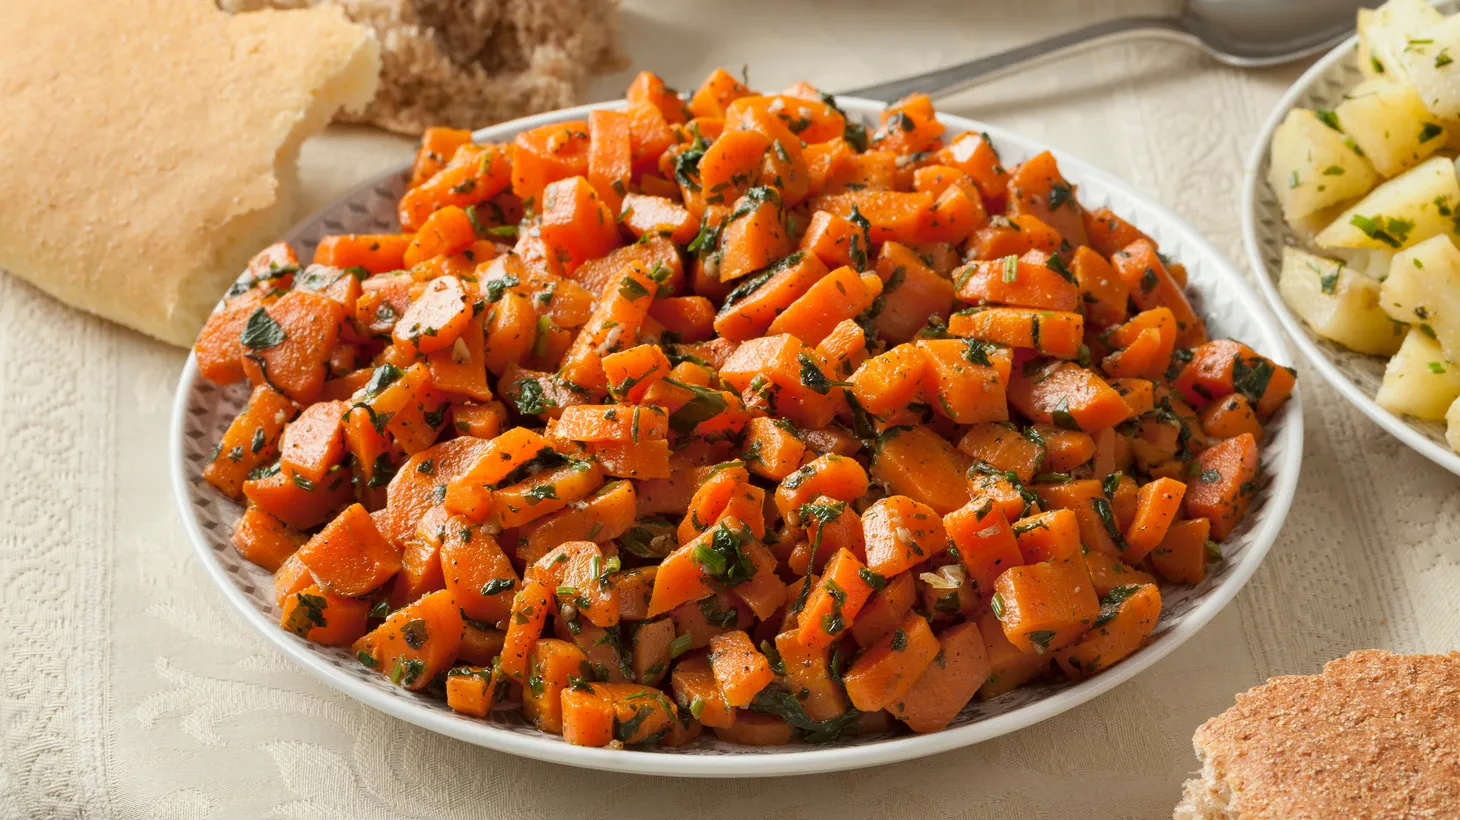 Classic Moroccan carrot salad is so easy, you don’t need a recipe.